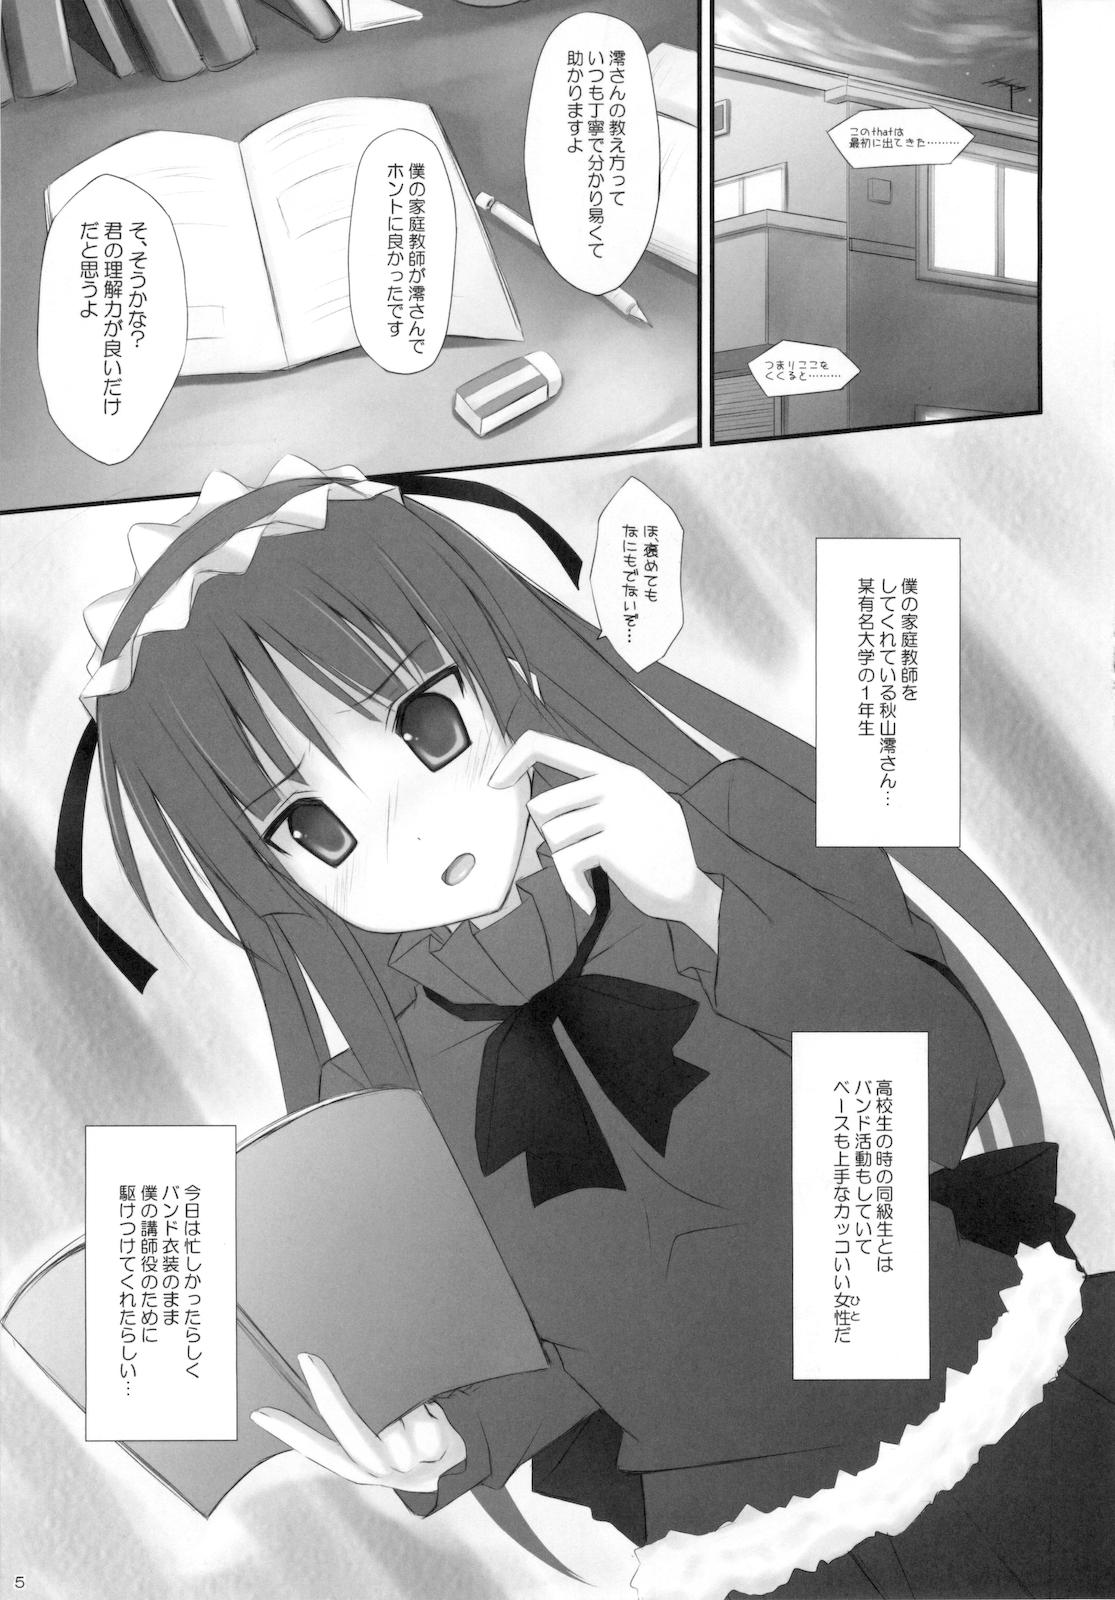 Xxx LESSON GOES ON - K-on Moms - Page 3